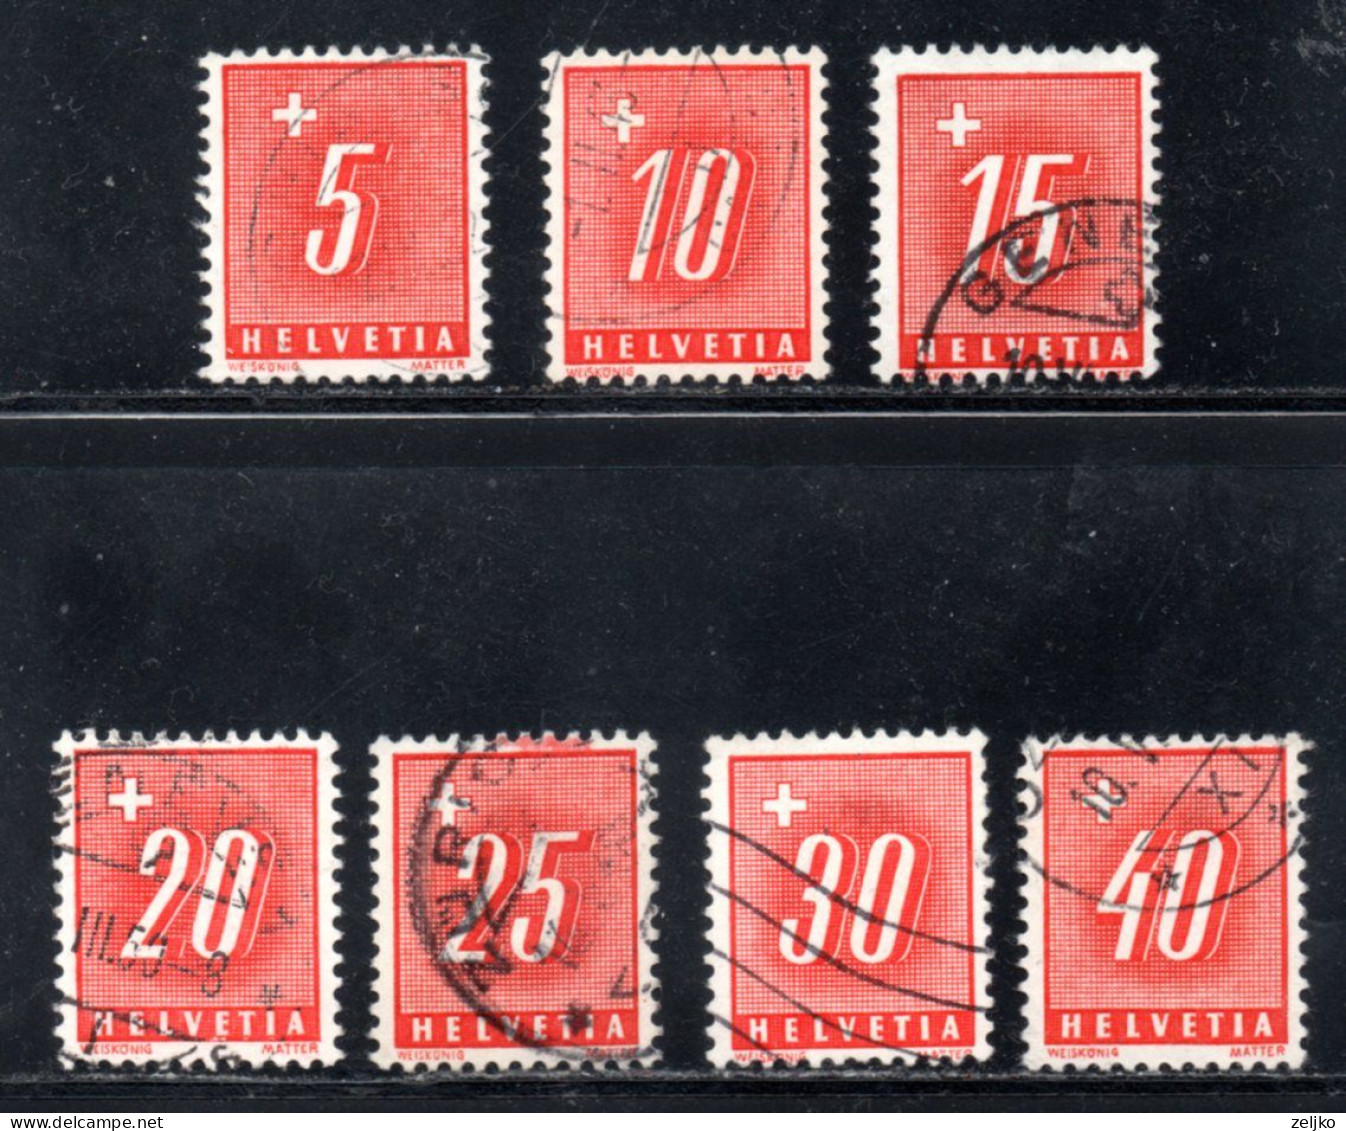 Switzerland, Used, Porto 1938, Michel 54 - 61, No. 62 Is Missing For Set - Postage Due